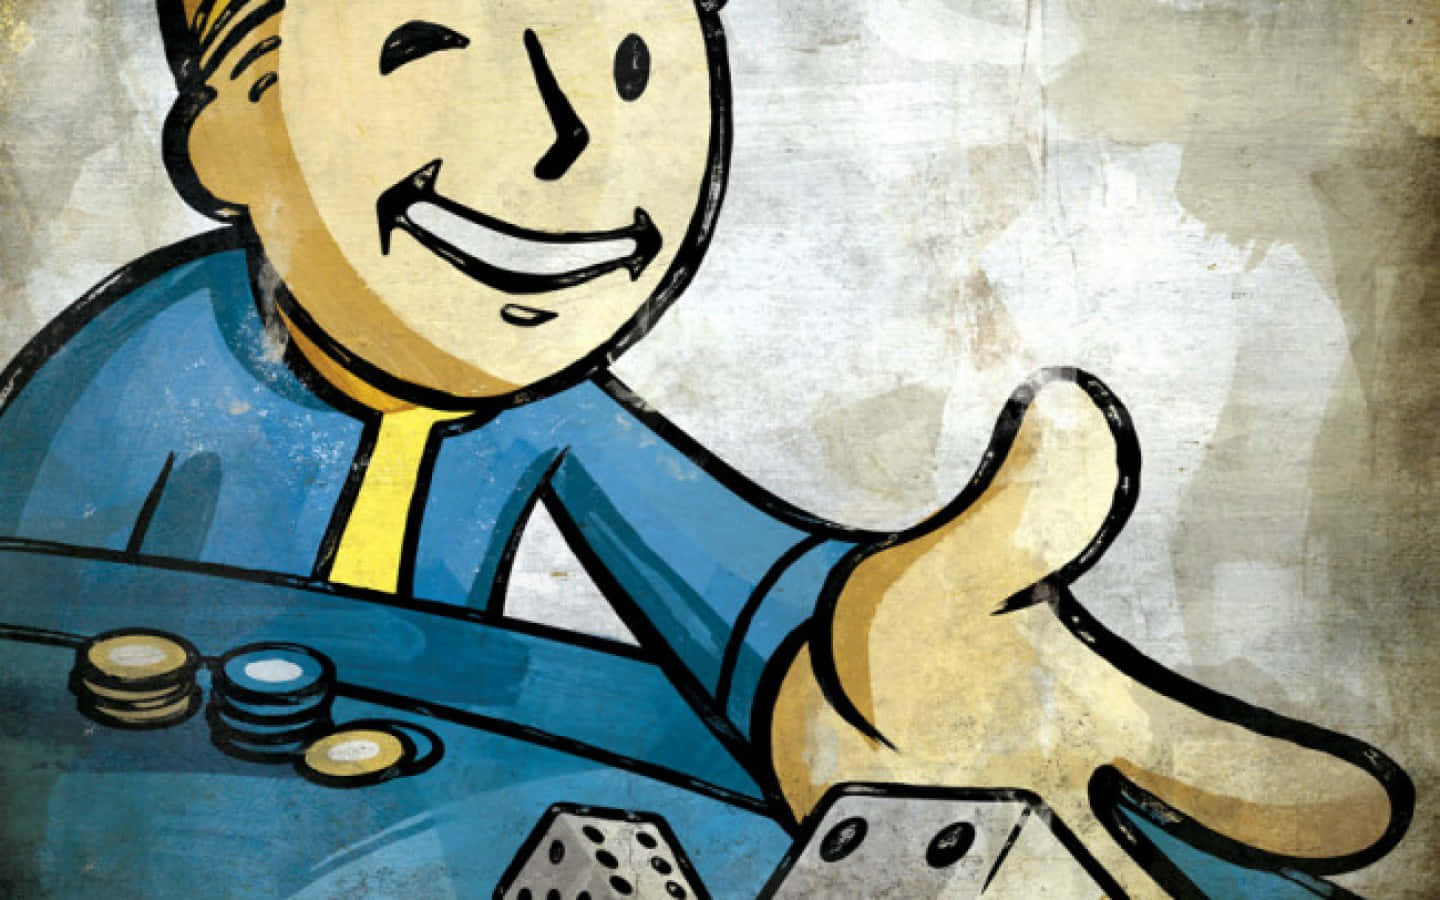 Welcome to the Vault - Take a Look at Vault Boy! Wallpaper